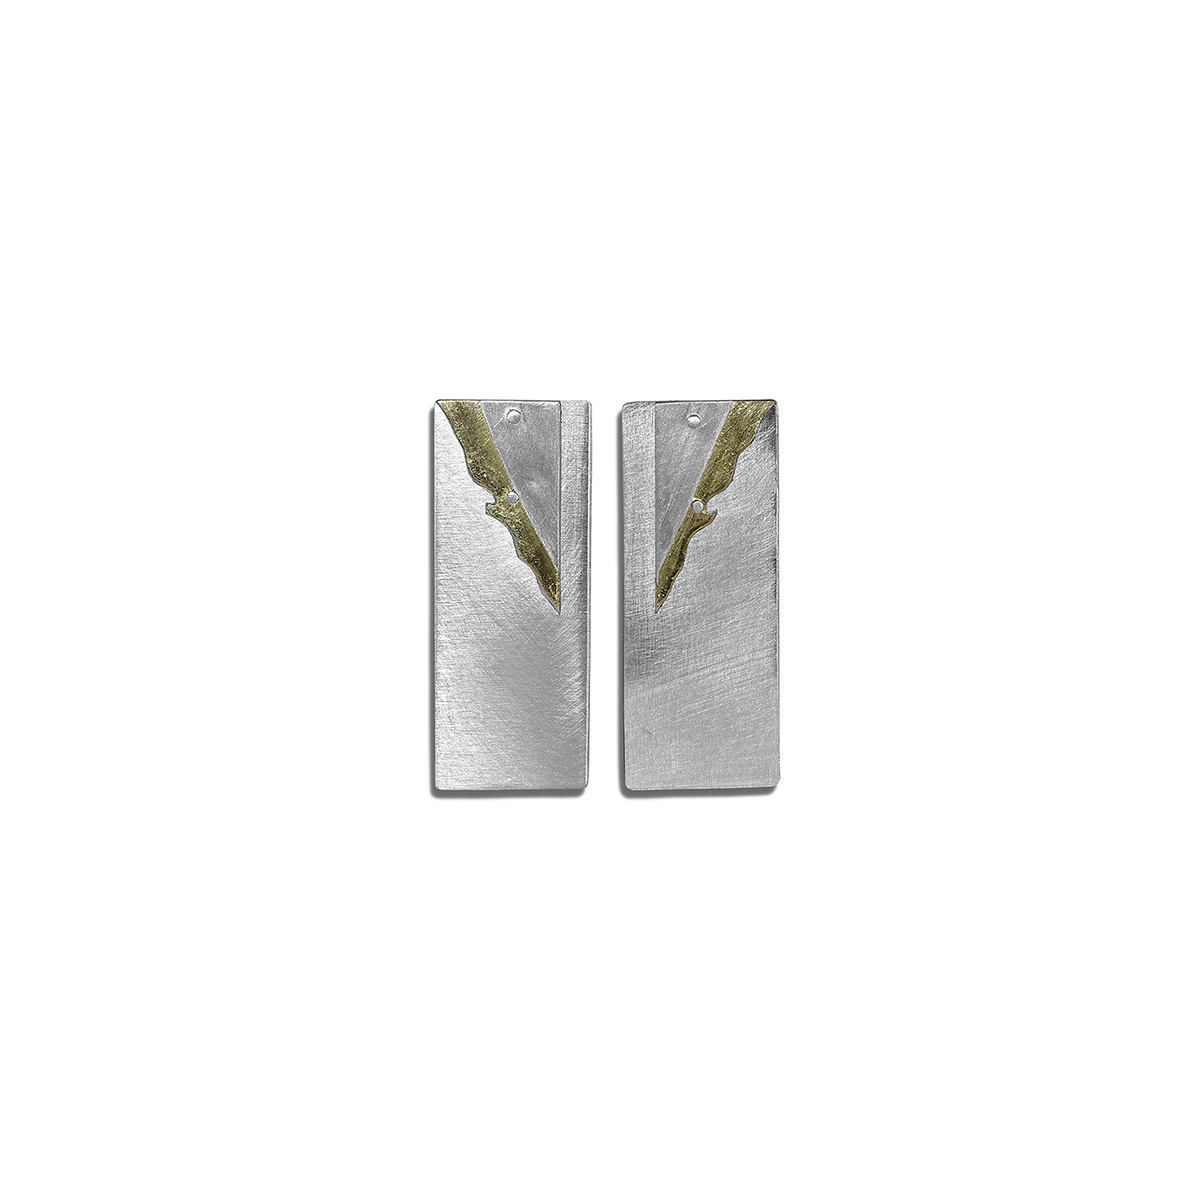 Modern Earrings in aluminum with 24kt gold and silver accents